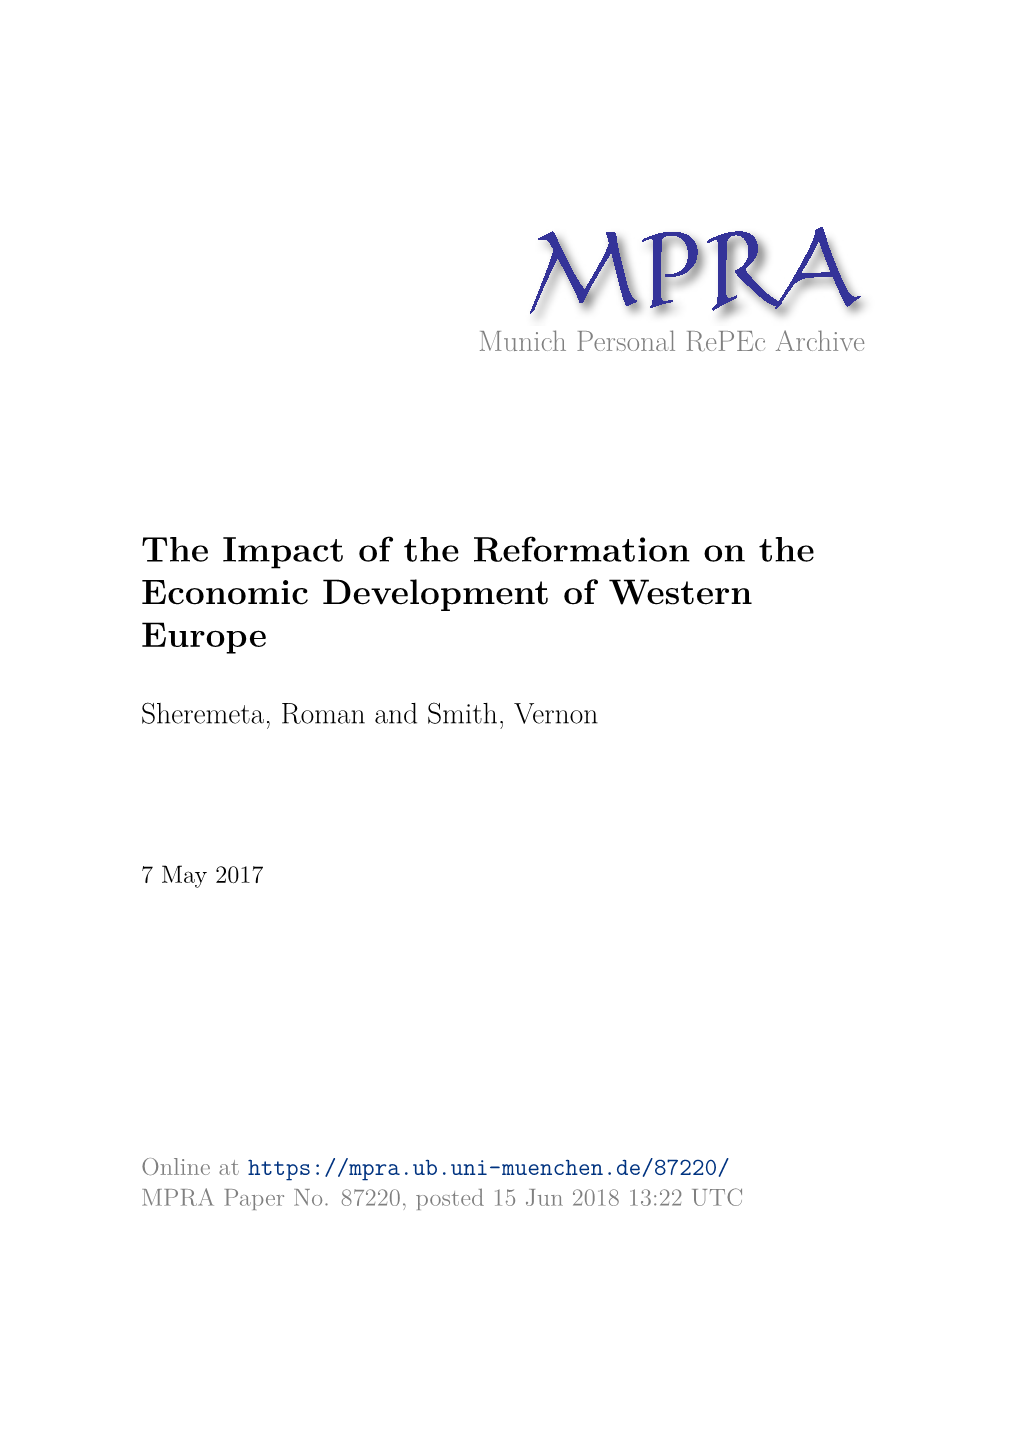 The Impact of the Reformation on the Economic Development of Western Europe